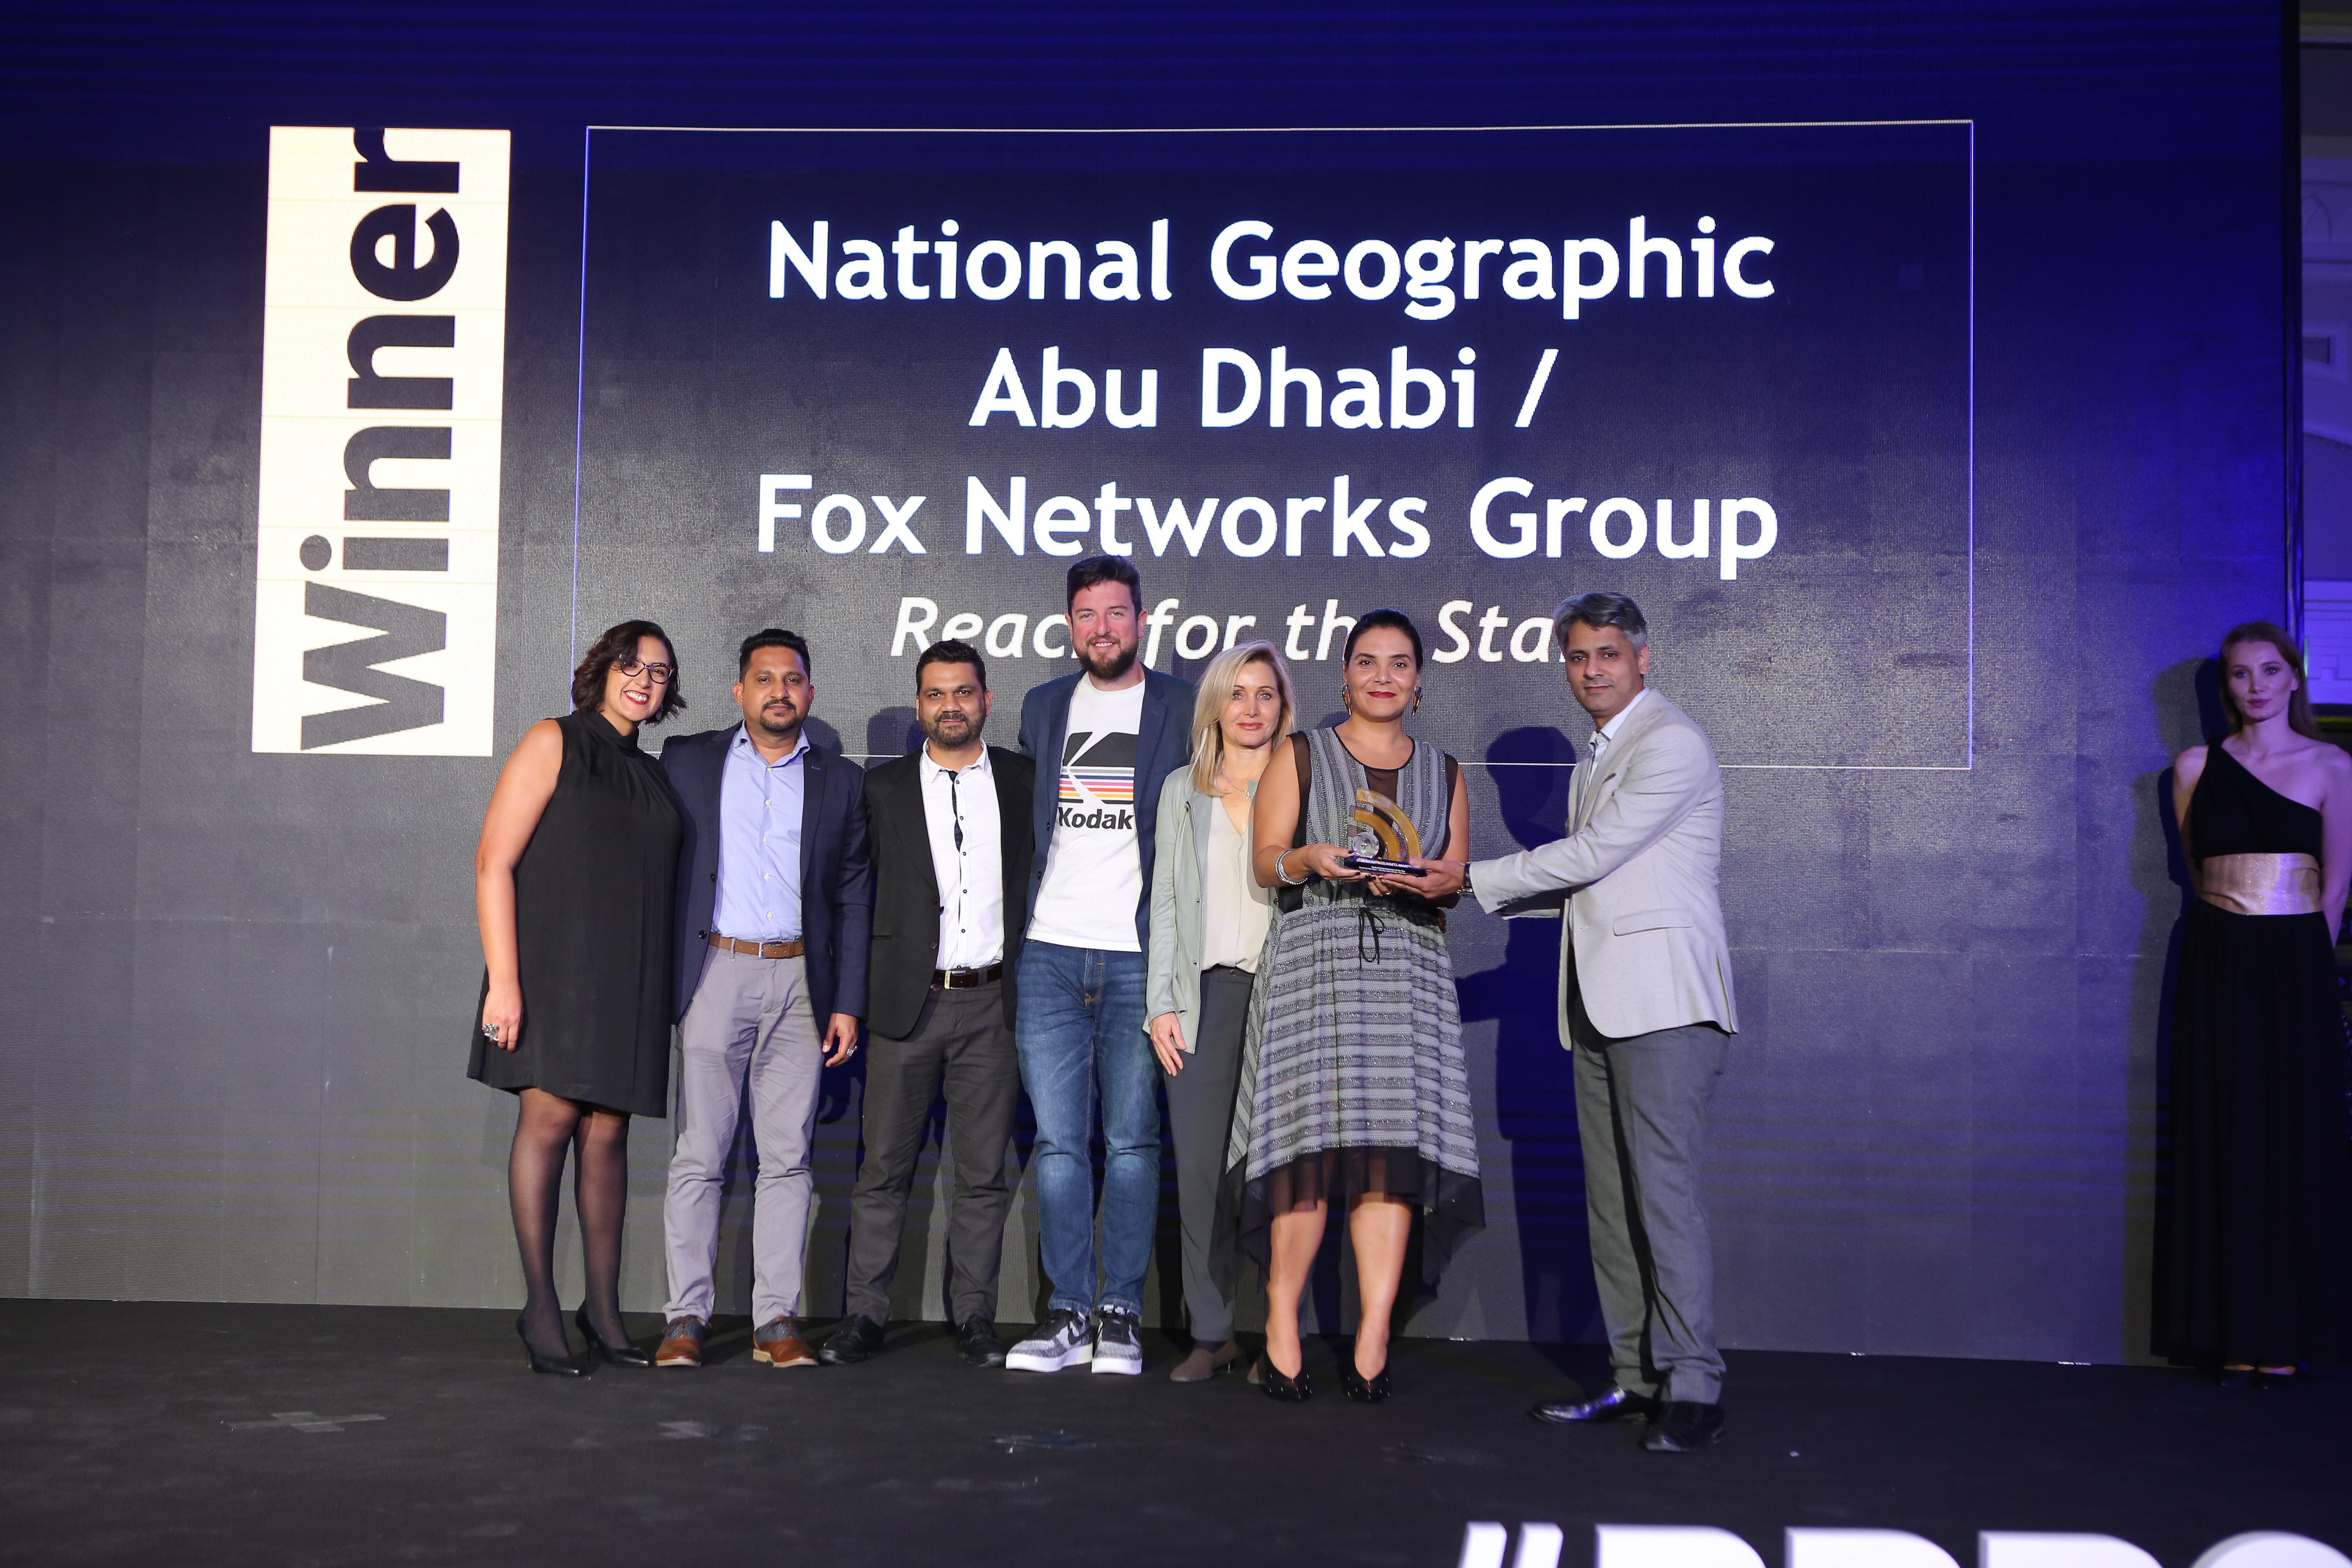 National Geographic Abu Dhabi Wins Award For Best Factual Entertainment Of The Year At ASBU BroadcastPro 2019 Awards